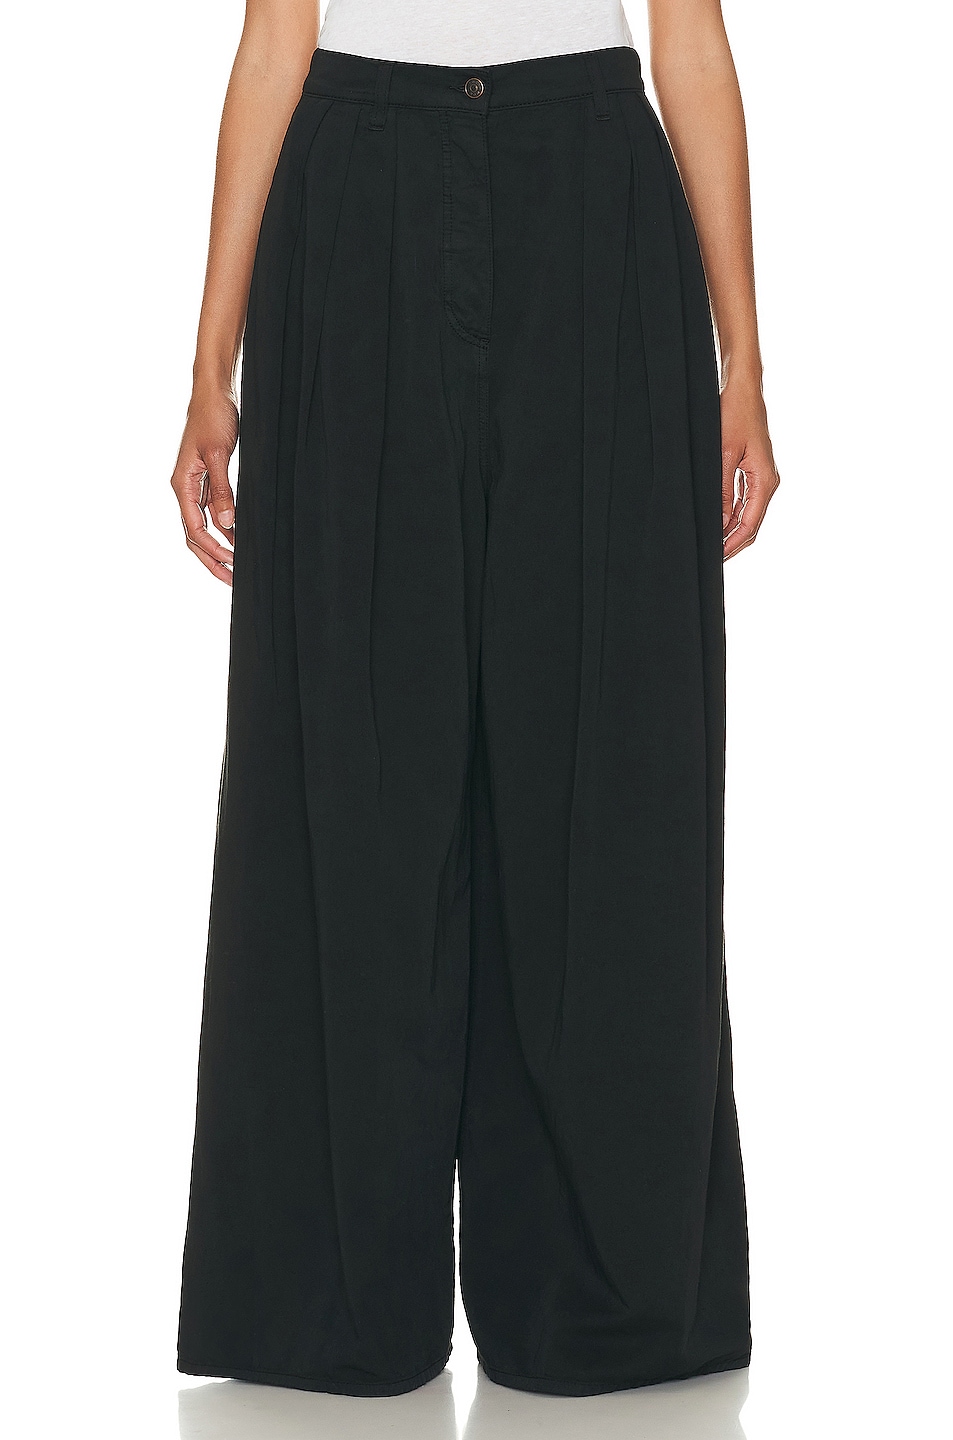 Image 1 of The Row Criselle Jean in Black